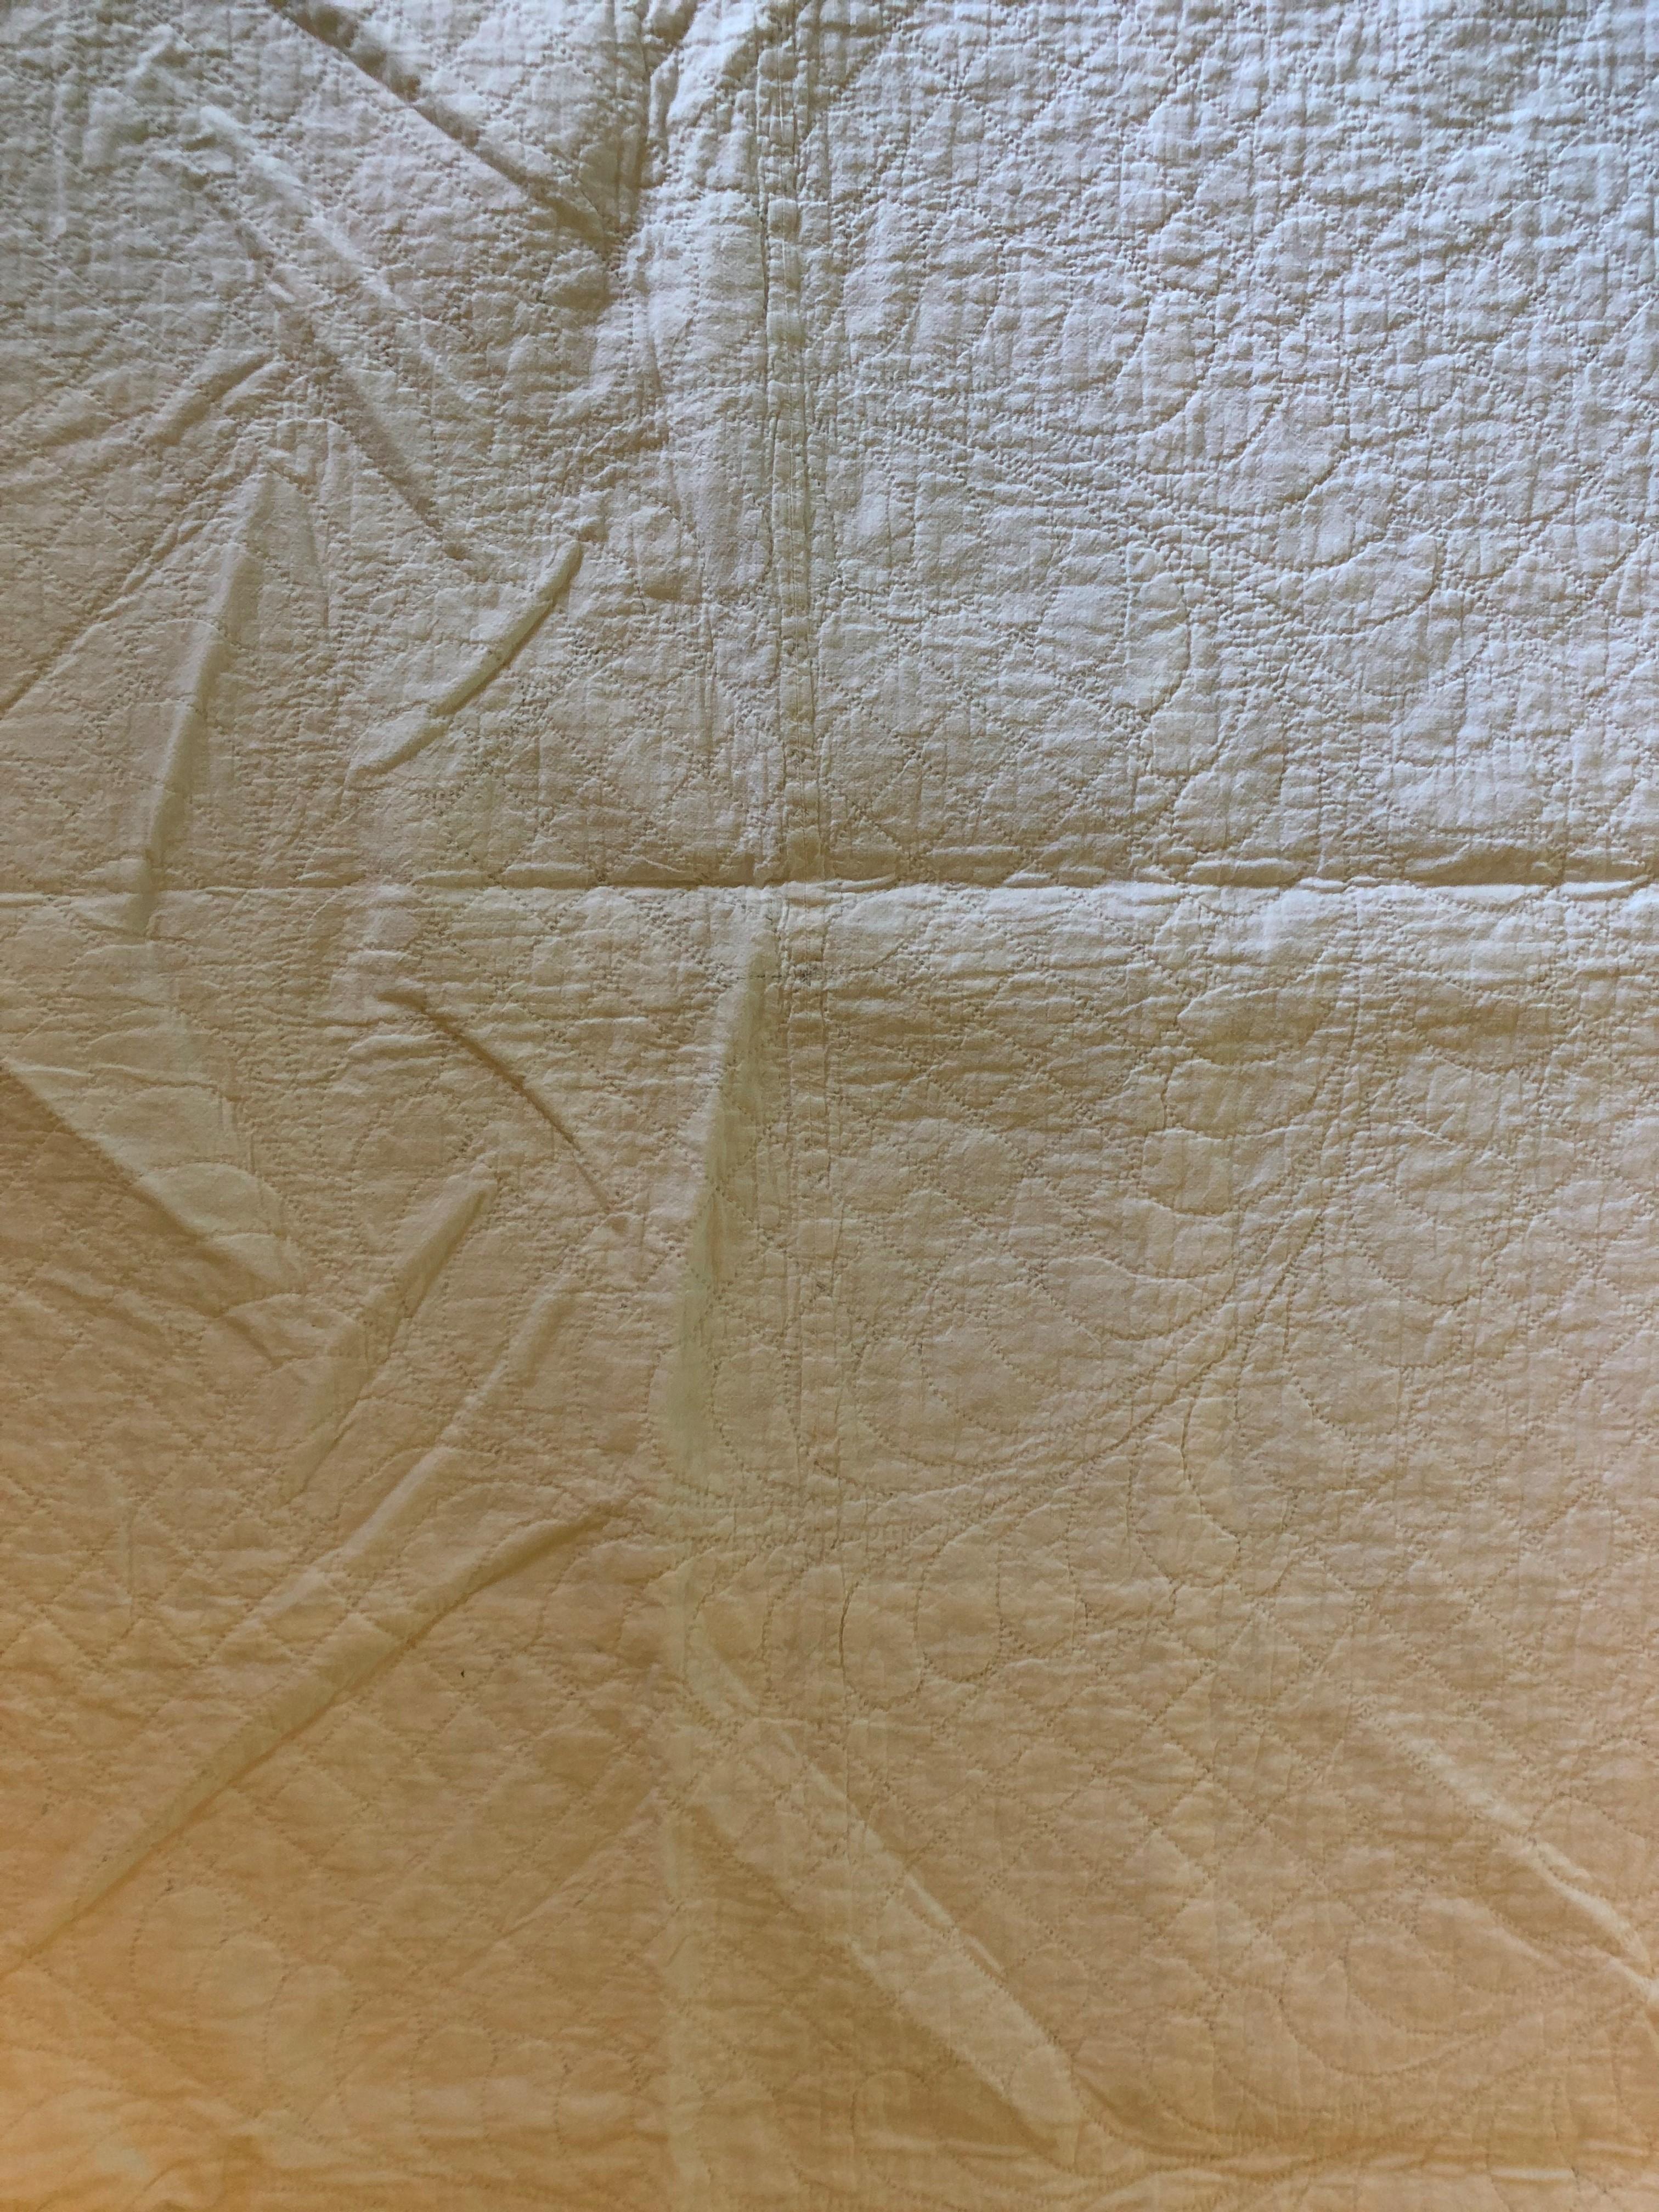 American Beautiful Hand Sewn Amish Bridal Quilt in Excellent Condition For Sale